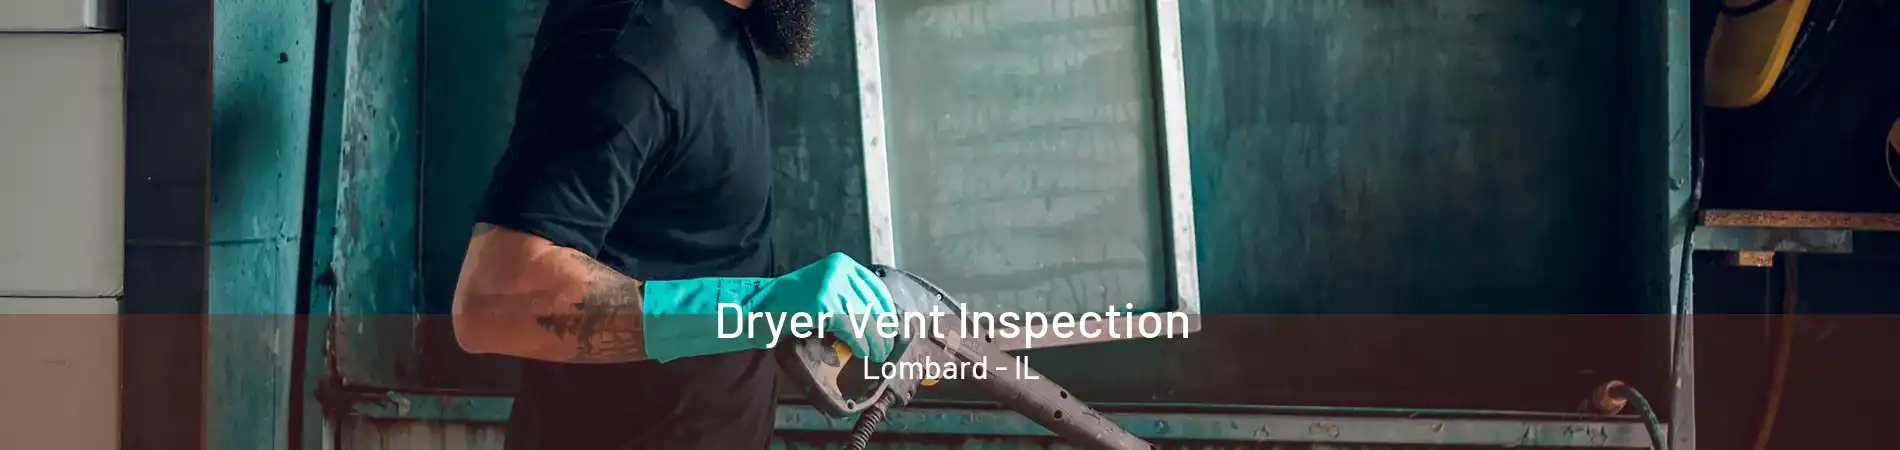 Dryer Vent Inspection Lombard - IL